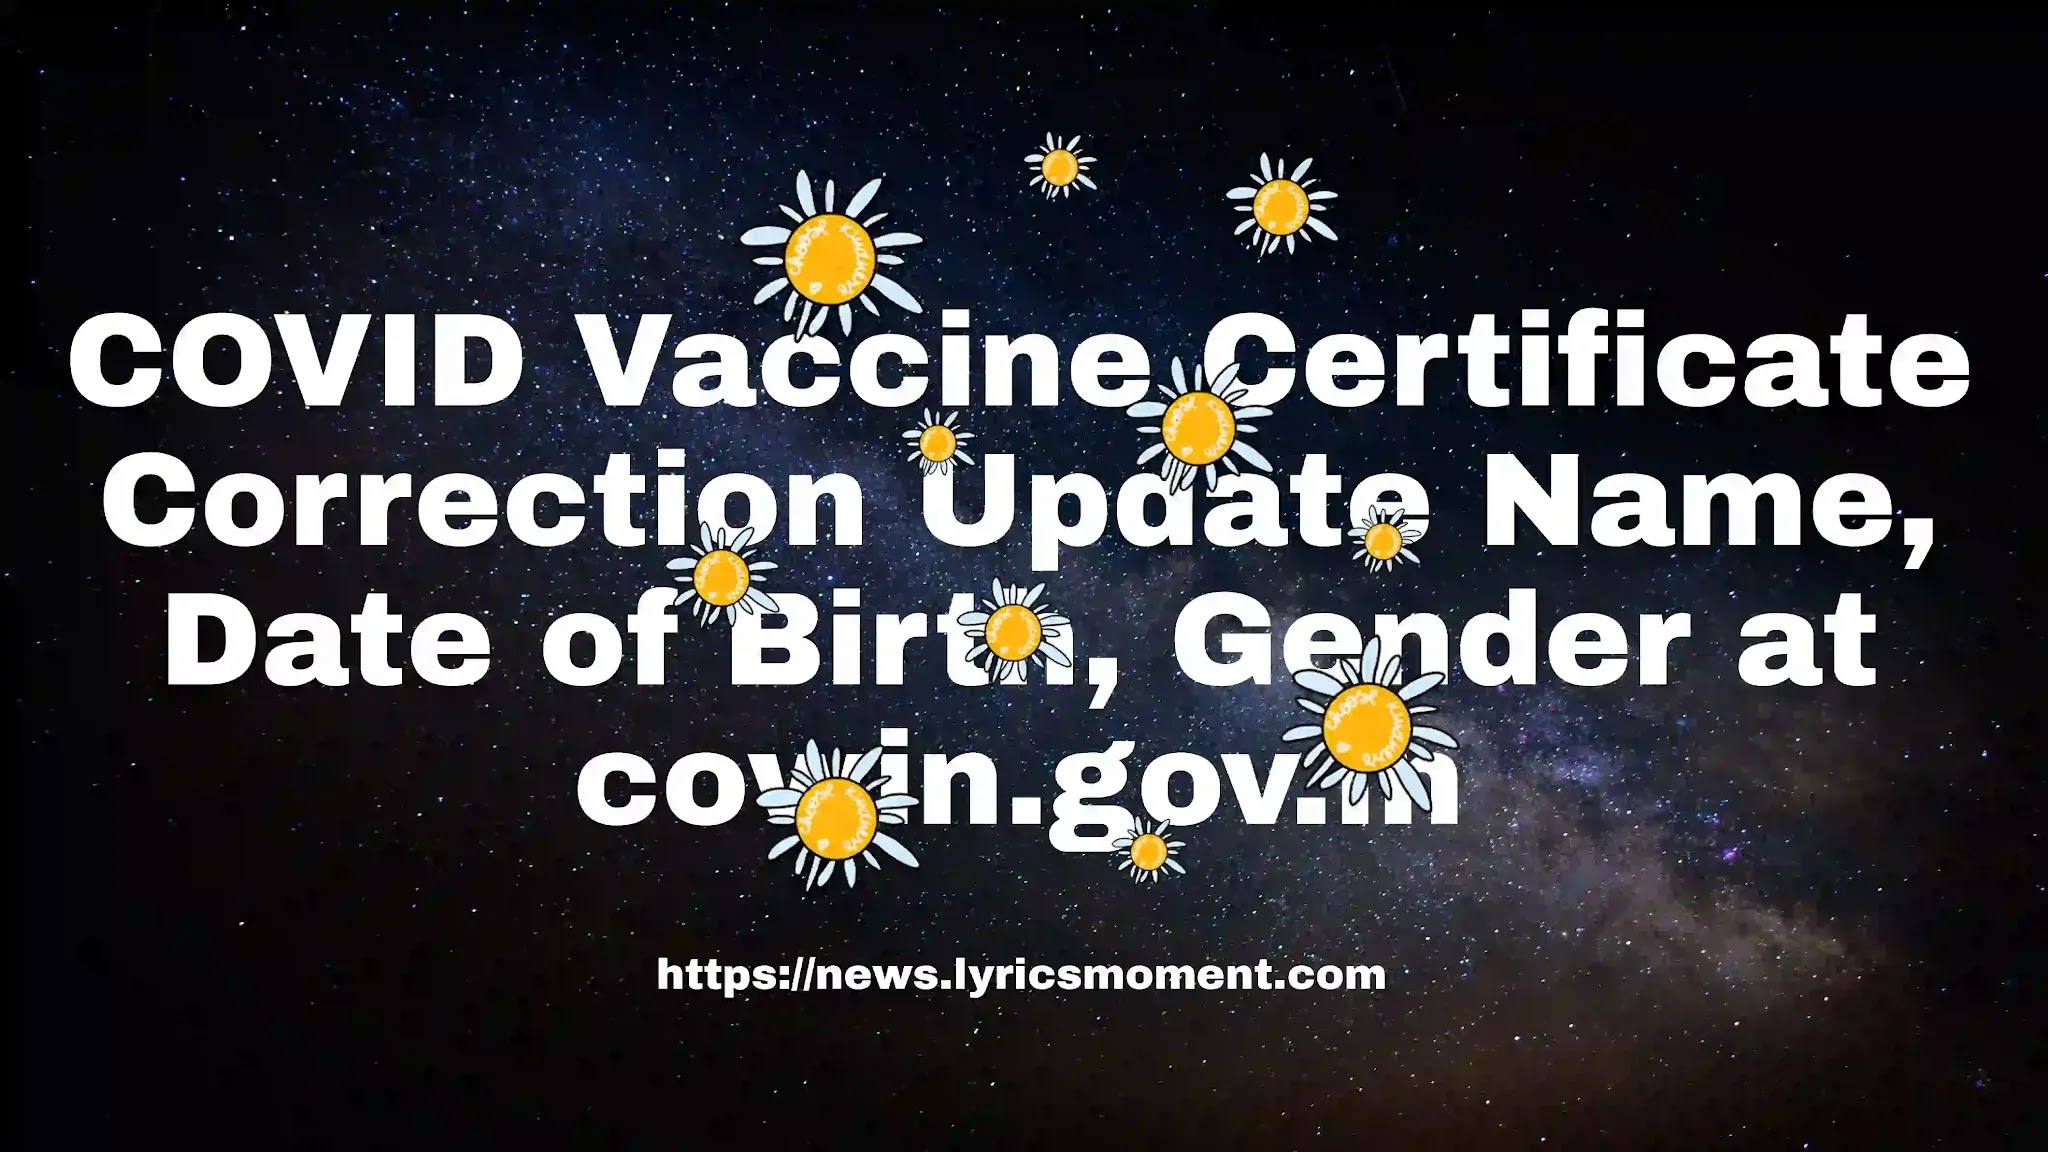 COVID Vaccine Certificate Correction Update Name, Date of Birth, Gender at cowin.gov.in